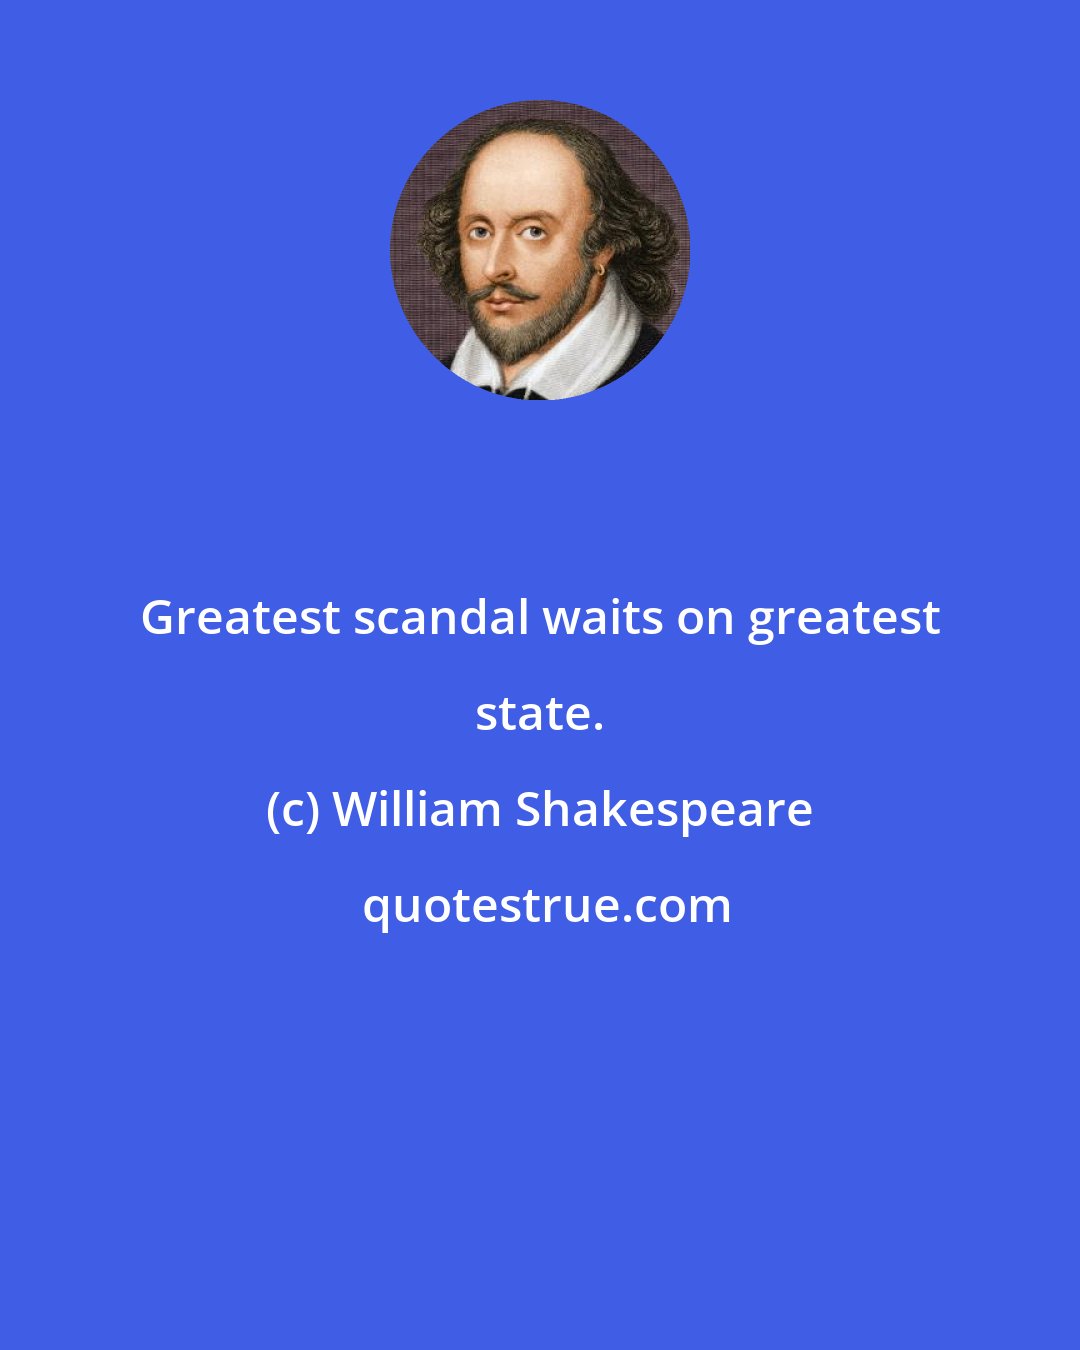 William Shakespeare: Greatest scandal waits on greatest state.